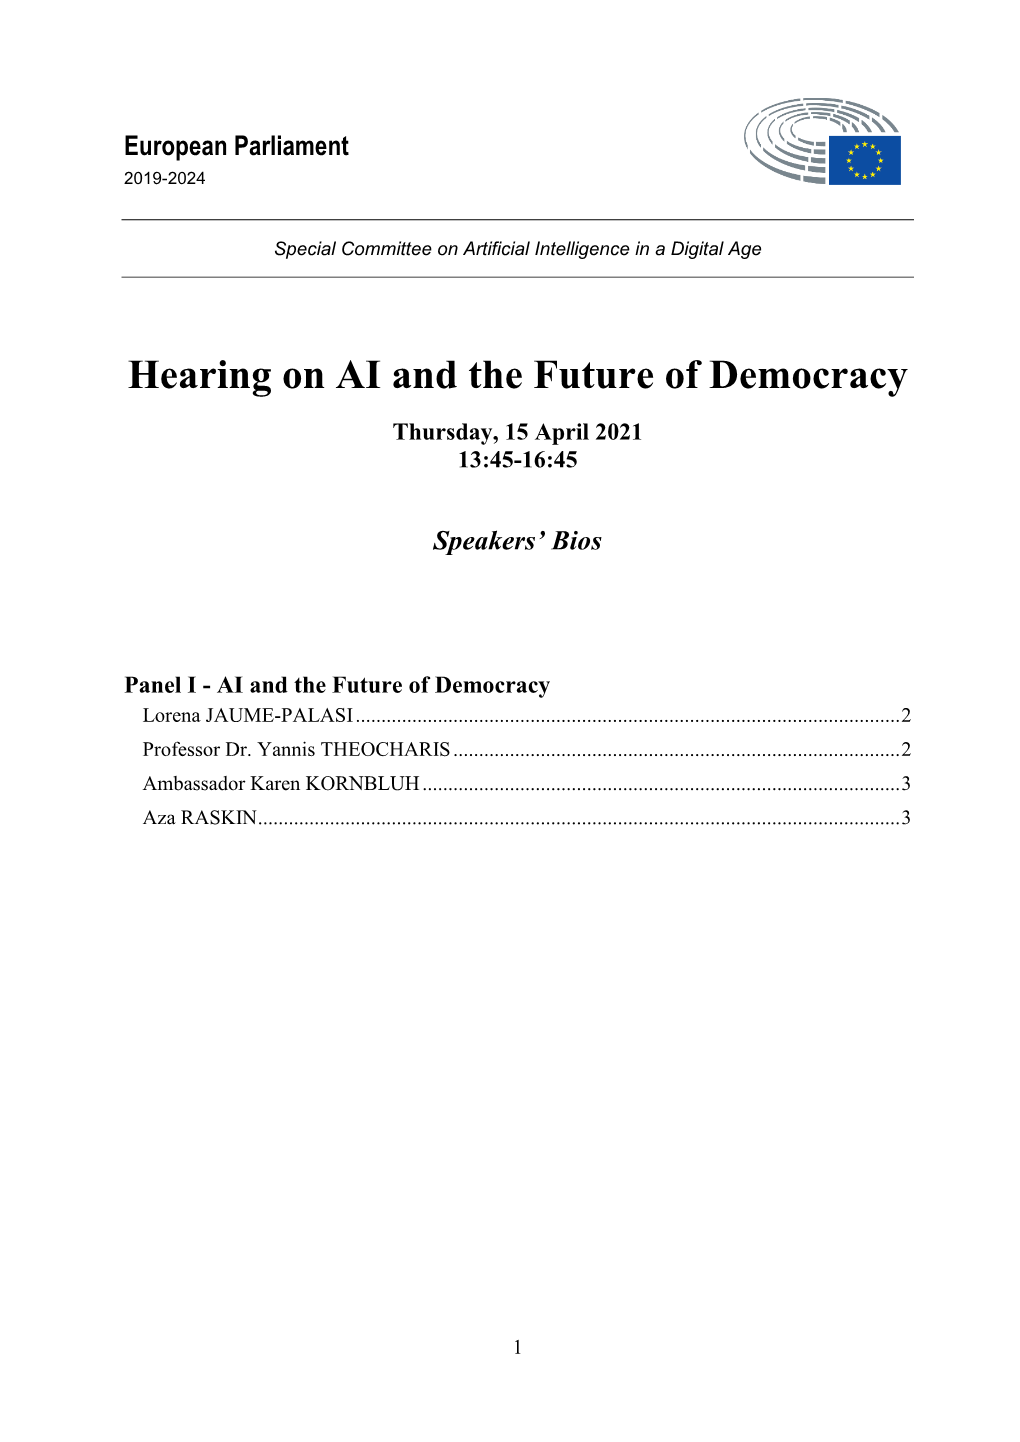 Hearing on AI and the Future of Democracy Thursday, 15 April 2021 13:45-16:45